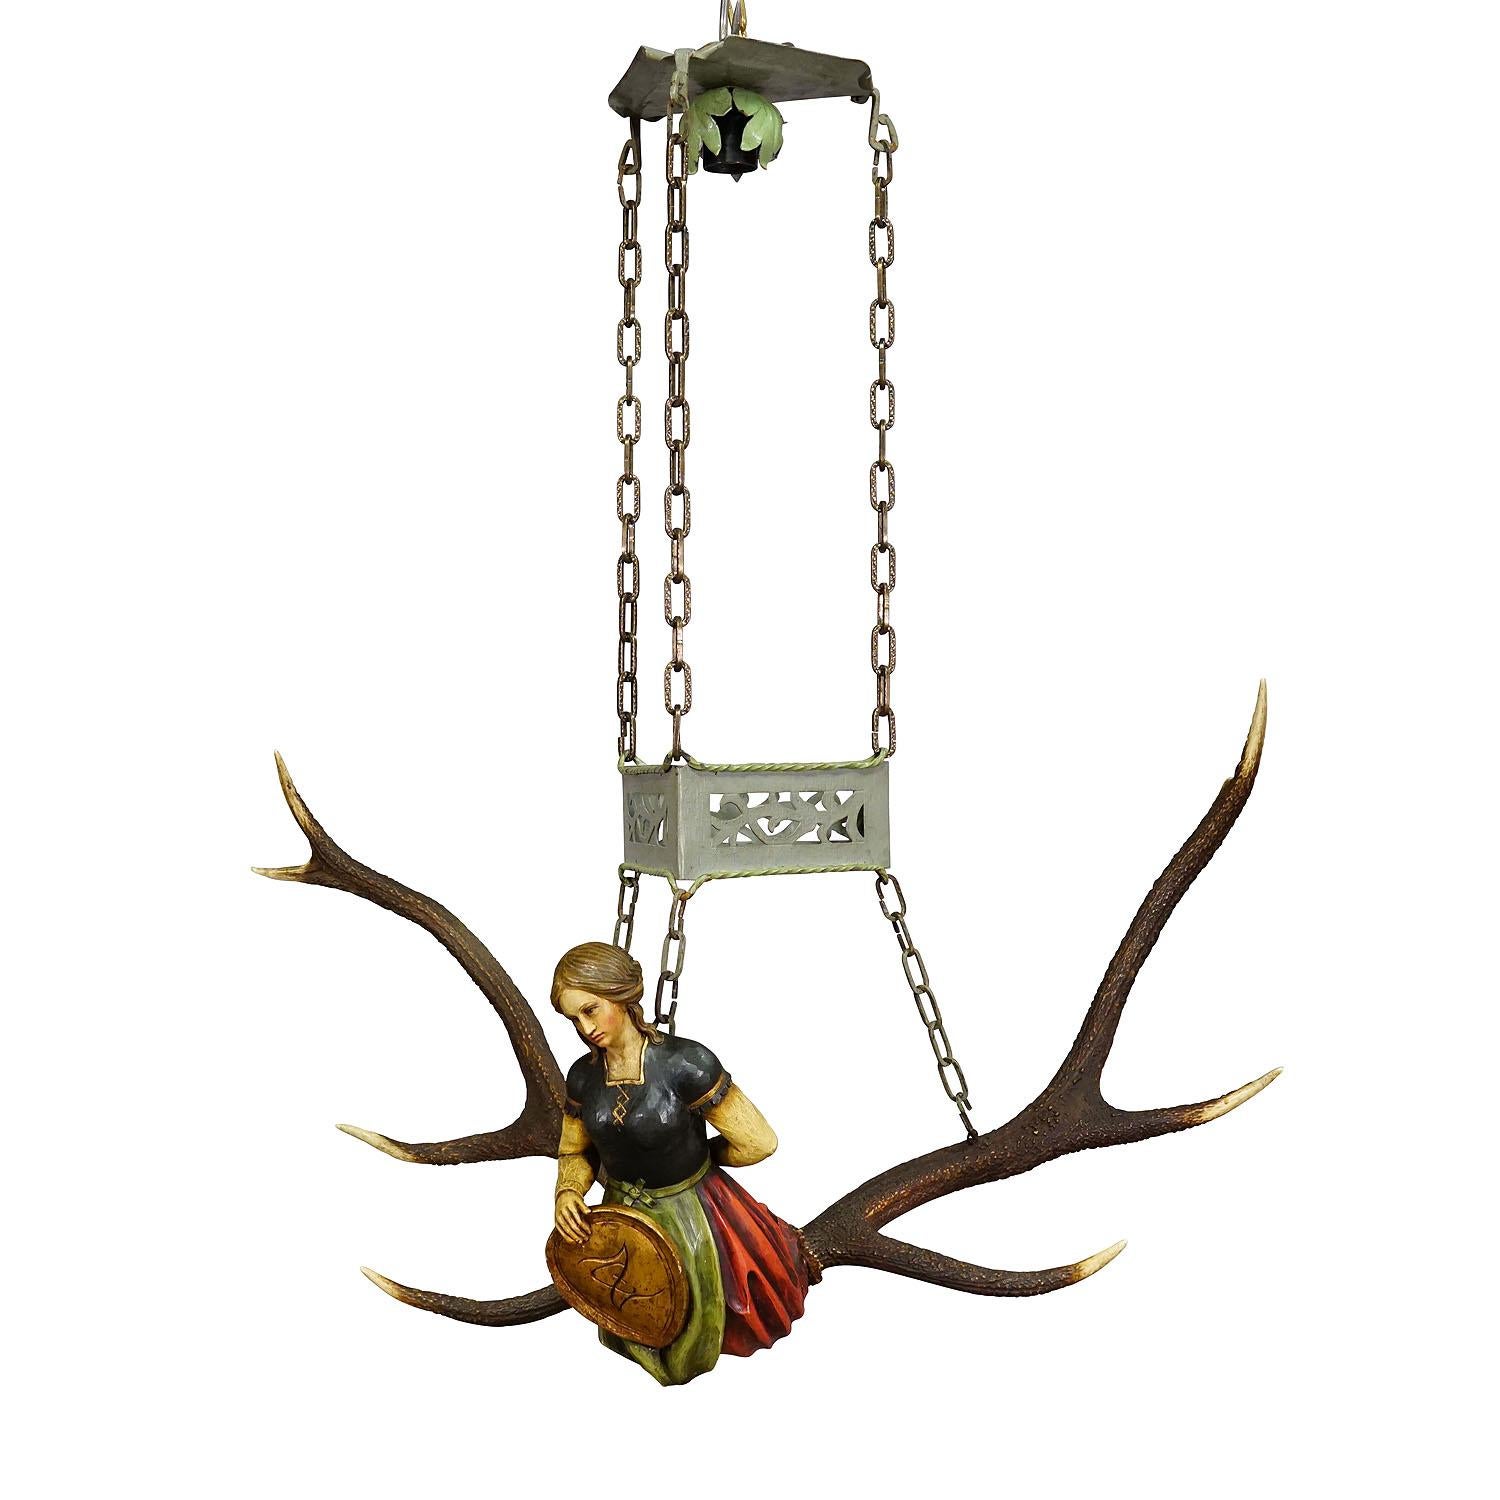 Antique Lusterweibchen of a Victorian Lady ca. 1920

A lovely antique lusterweibchen chandelier of a victorian noble lady holding a blazon. The sculpture is made of handcarved and painted wood and mounted on a large pair of deer antlers. It comes